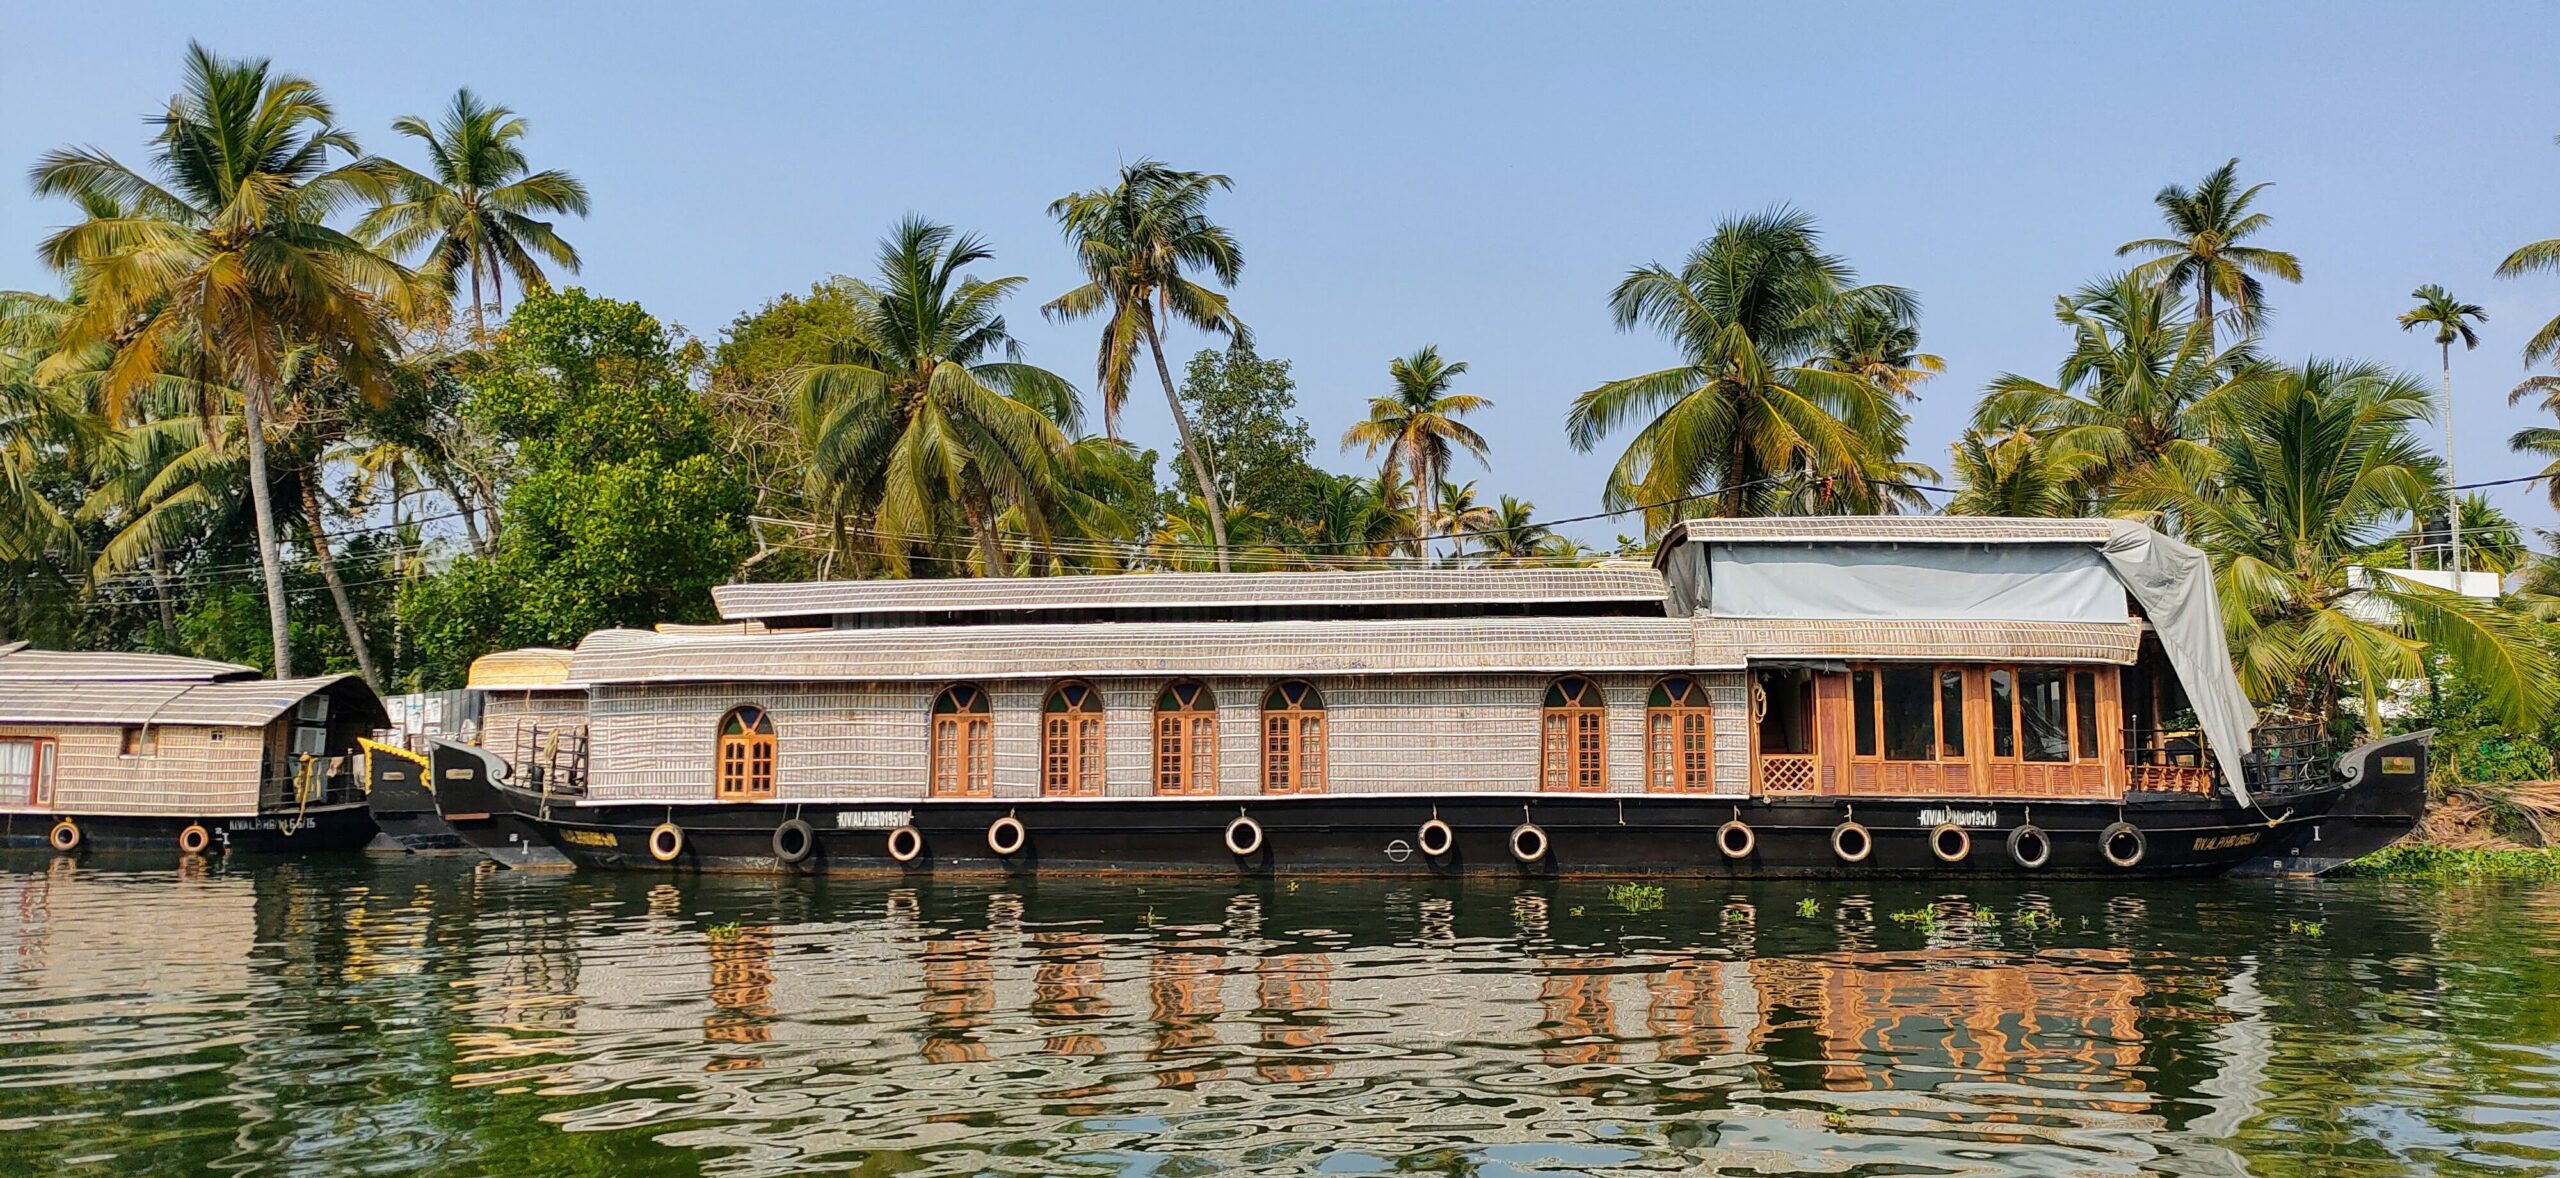 allappuzha scaled The Indian Journeys 2